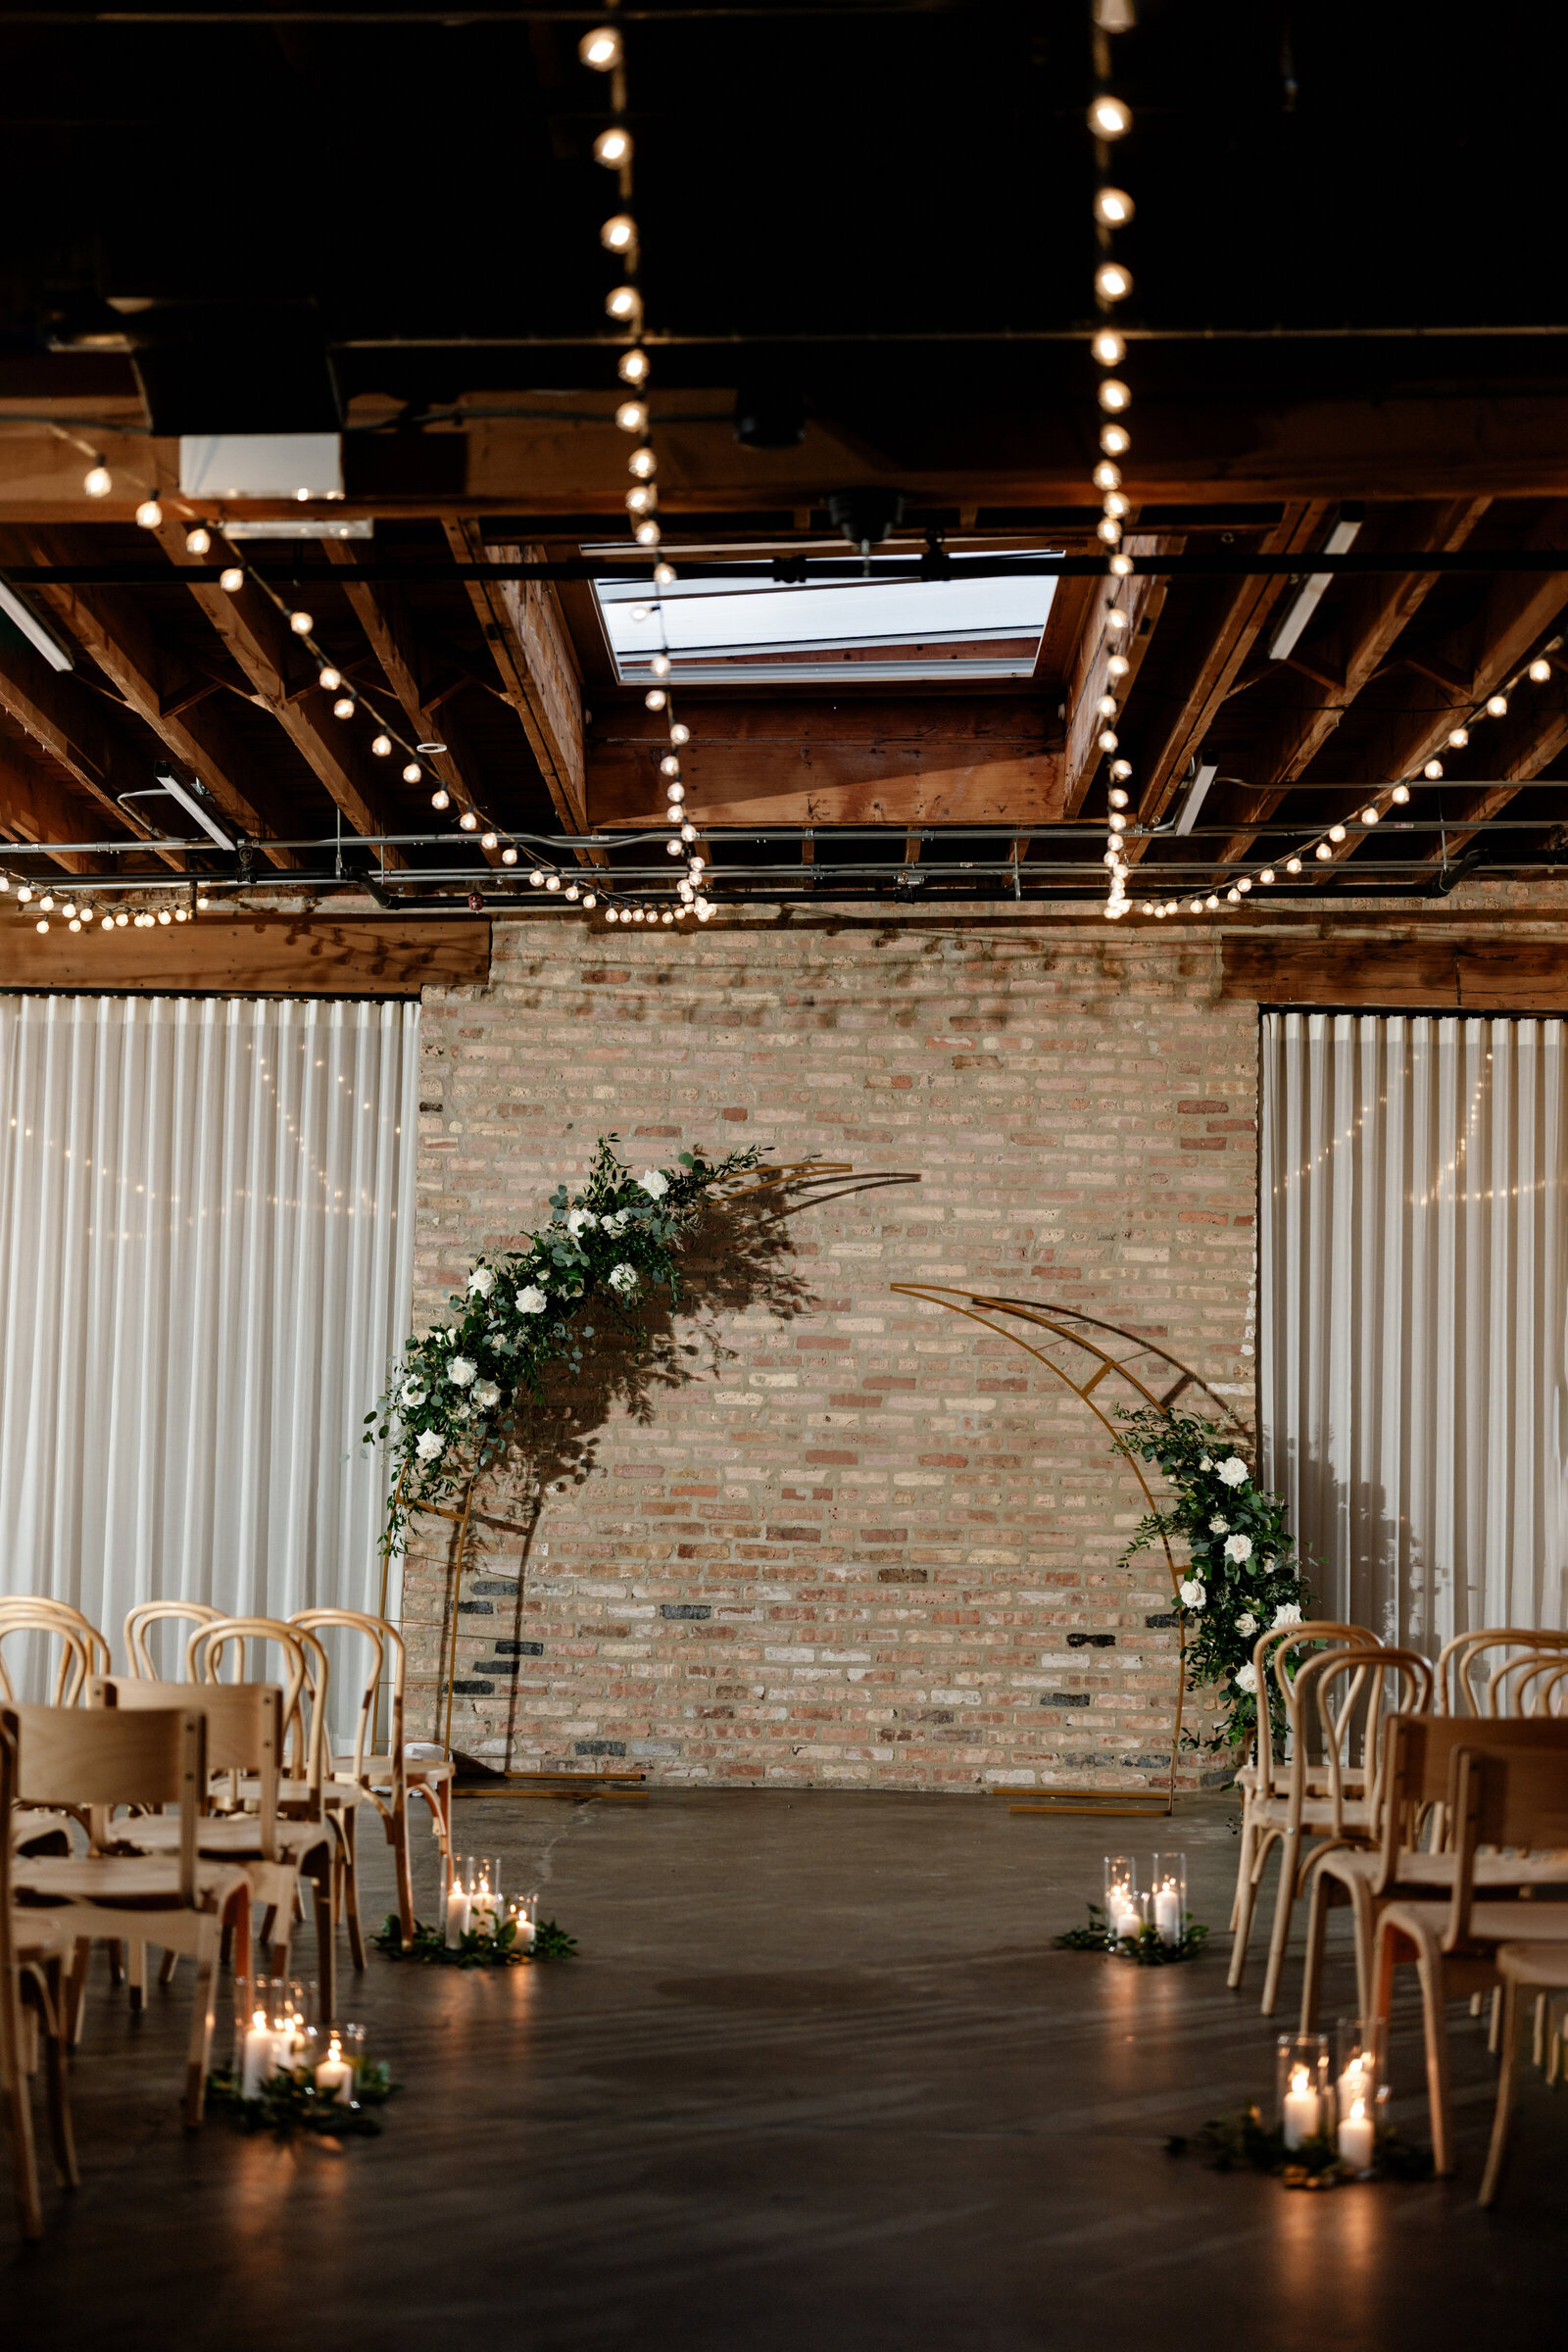 Aspen-Avenue-Chicago-Wedding-Photographer-Sweet-Chic-Events-Arbory-flowers-for-dreams-butter-and-vine-Genevieve's-FAV-73